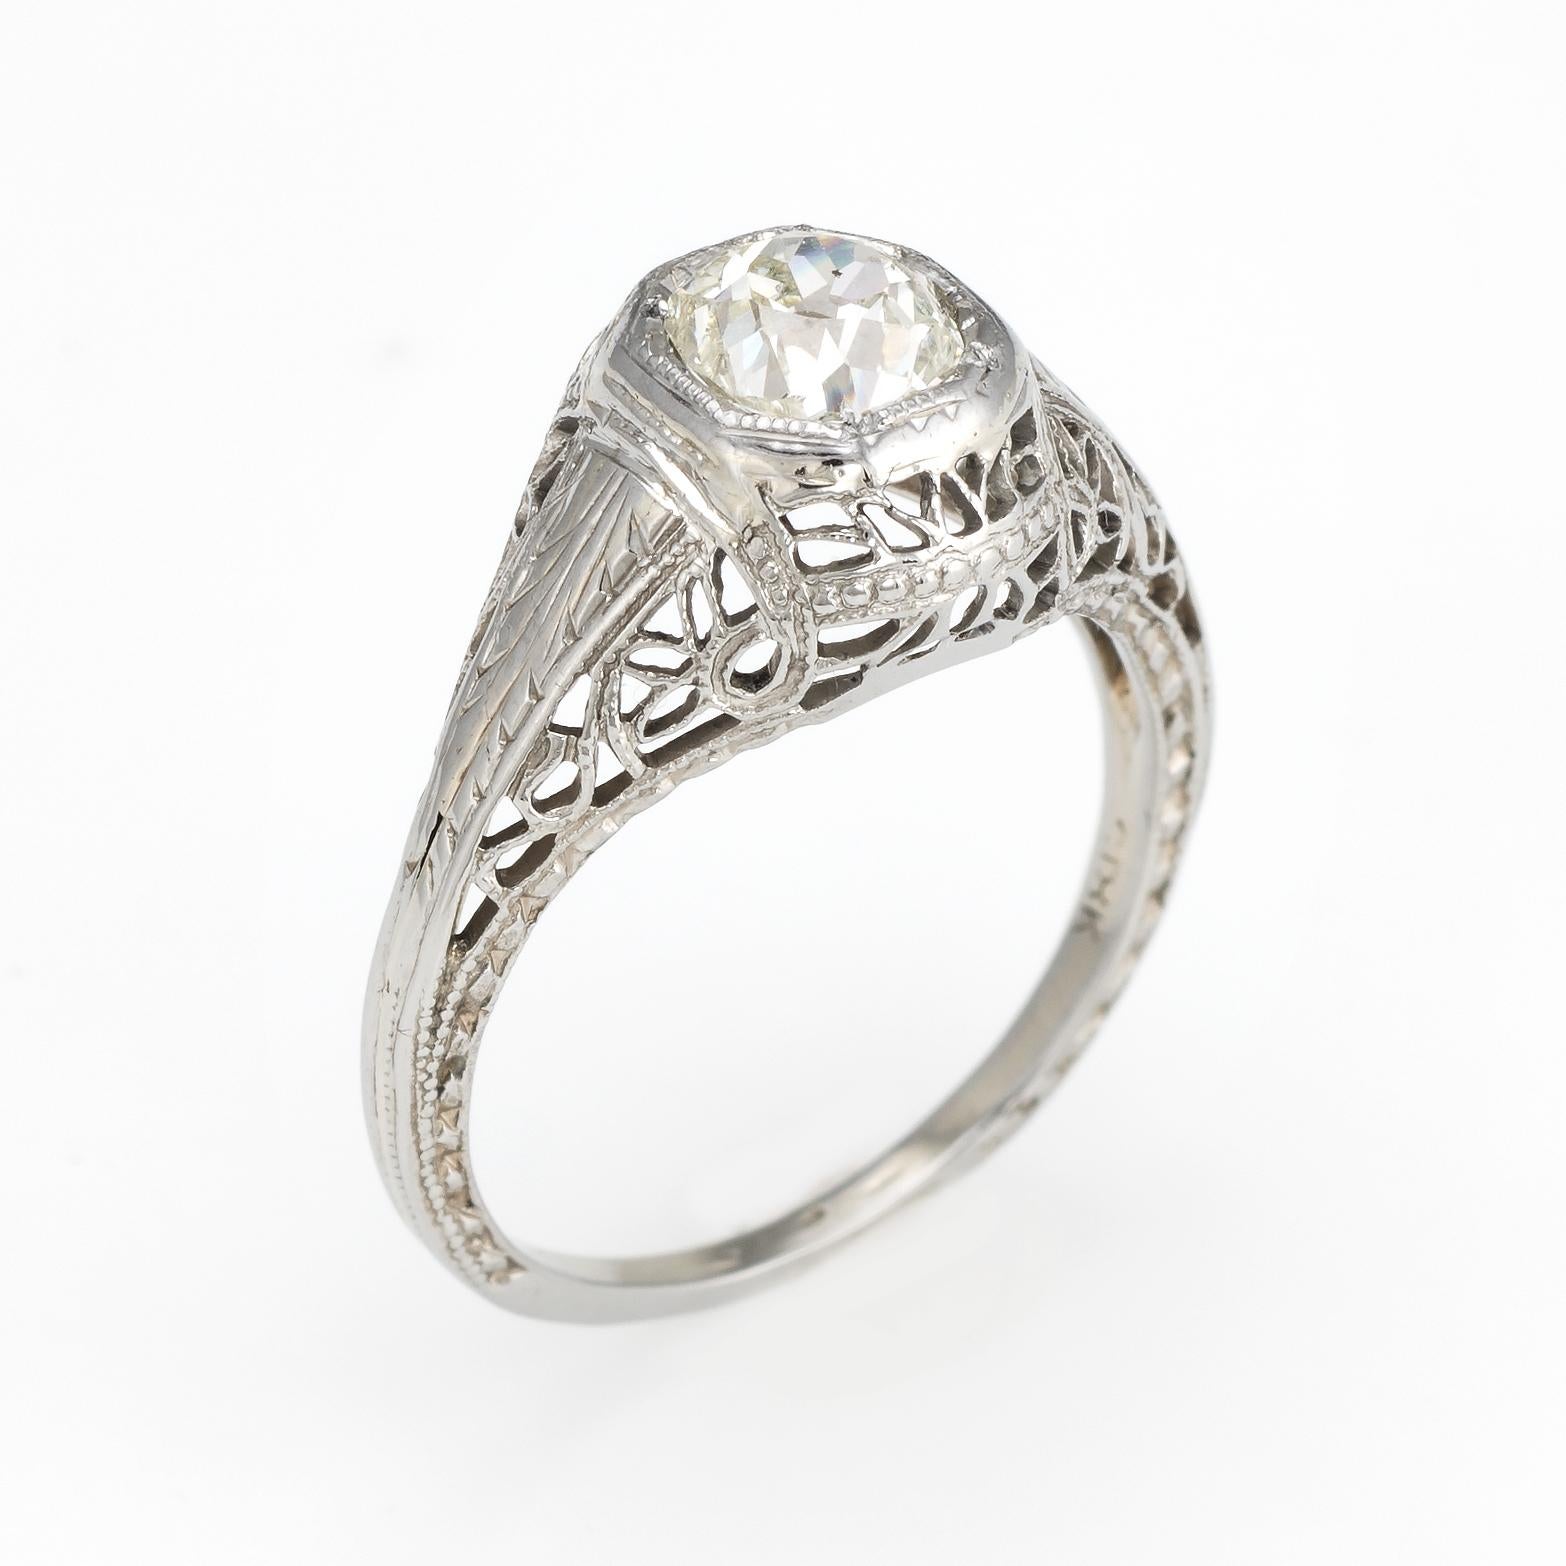 Elegant & finely detailed Art Deco era ring (circa 1920s to 1930s), crafted in 18 karat white gold. 

Centrally mounted estimated 0.60 carat Old Mine cut (estimated at K-L color and SI2 clarity).   

The ring epitomizes vintage charm and would make